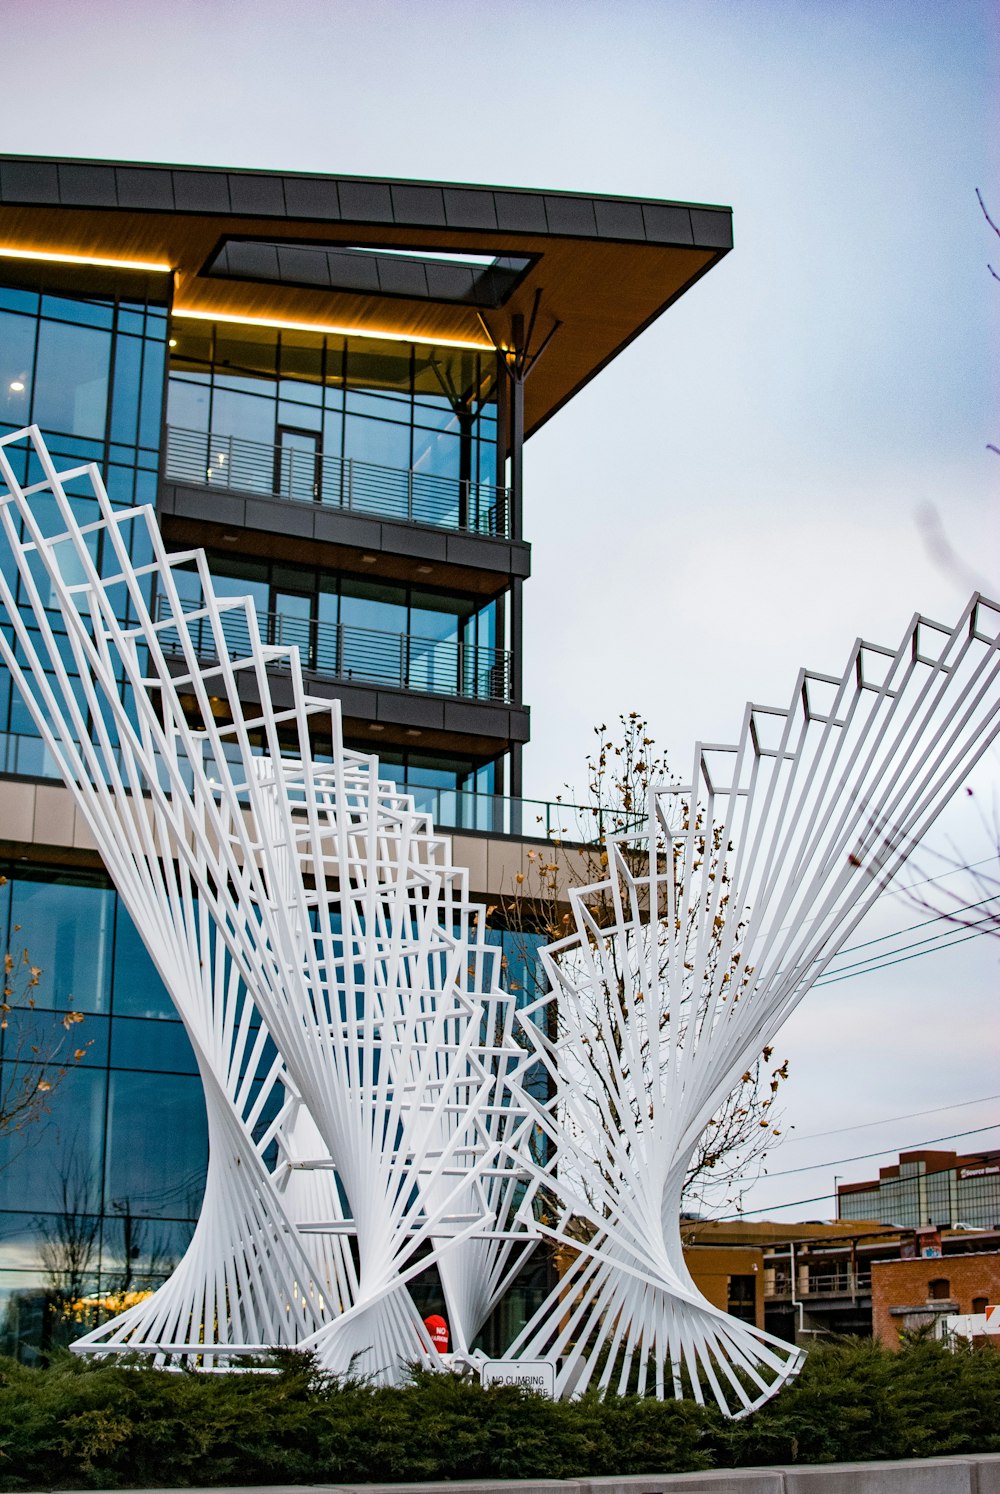 a large white sculpture in front of a building